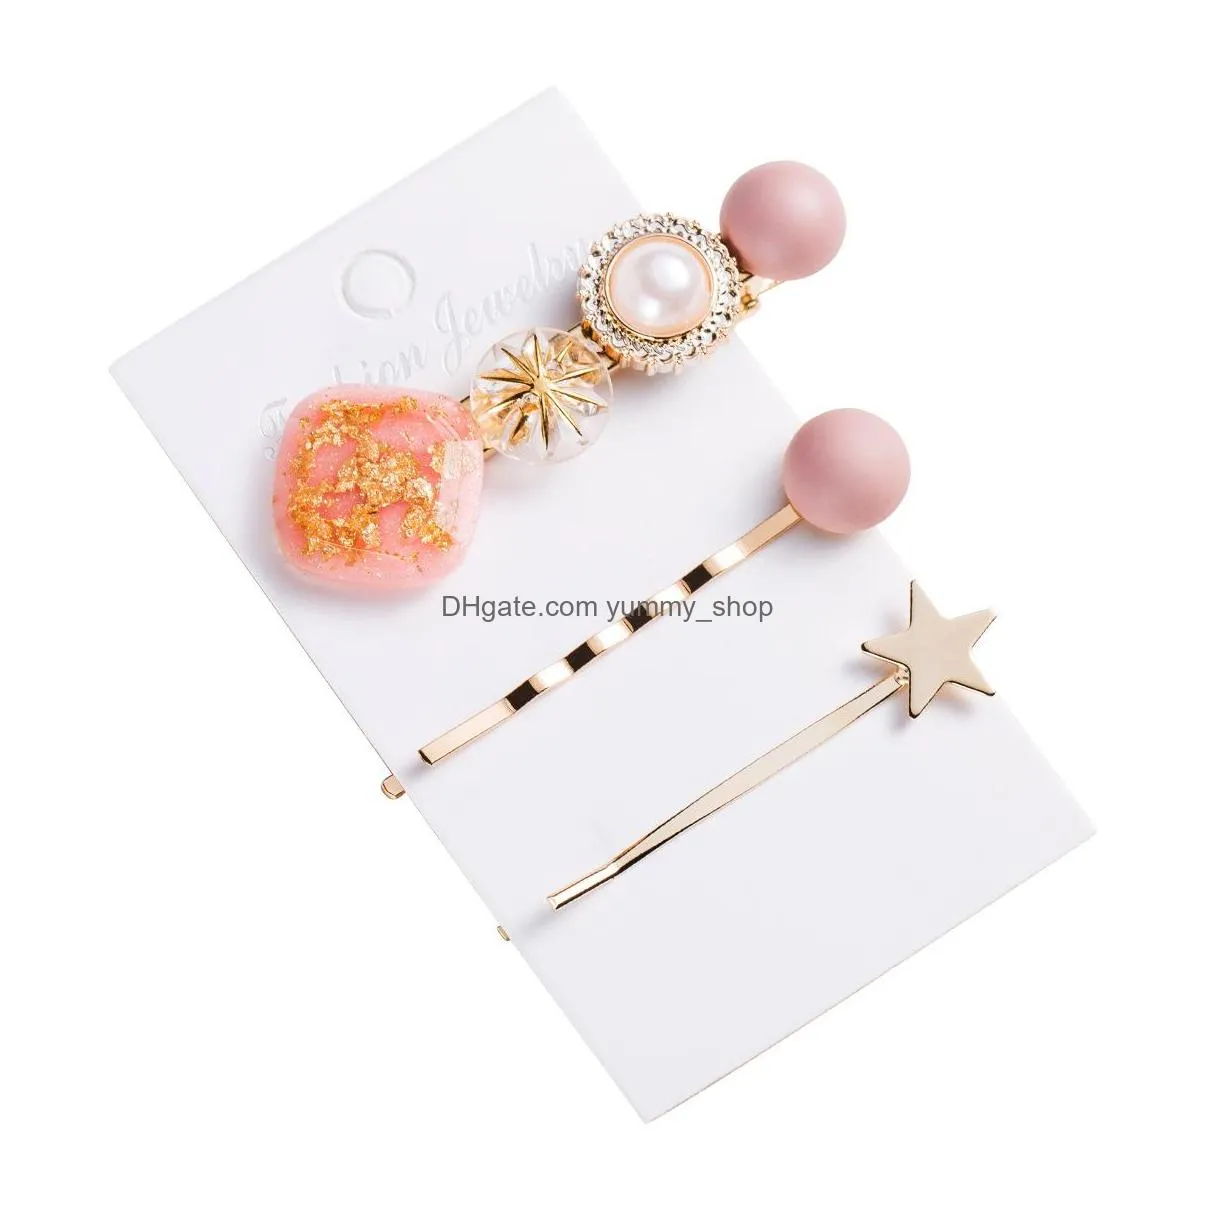 fashion jewelry womens sweet hairpin hair clip bobby pin resin beads charms barrettes 3pcs/set hair accessory